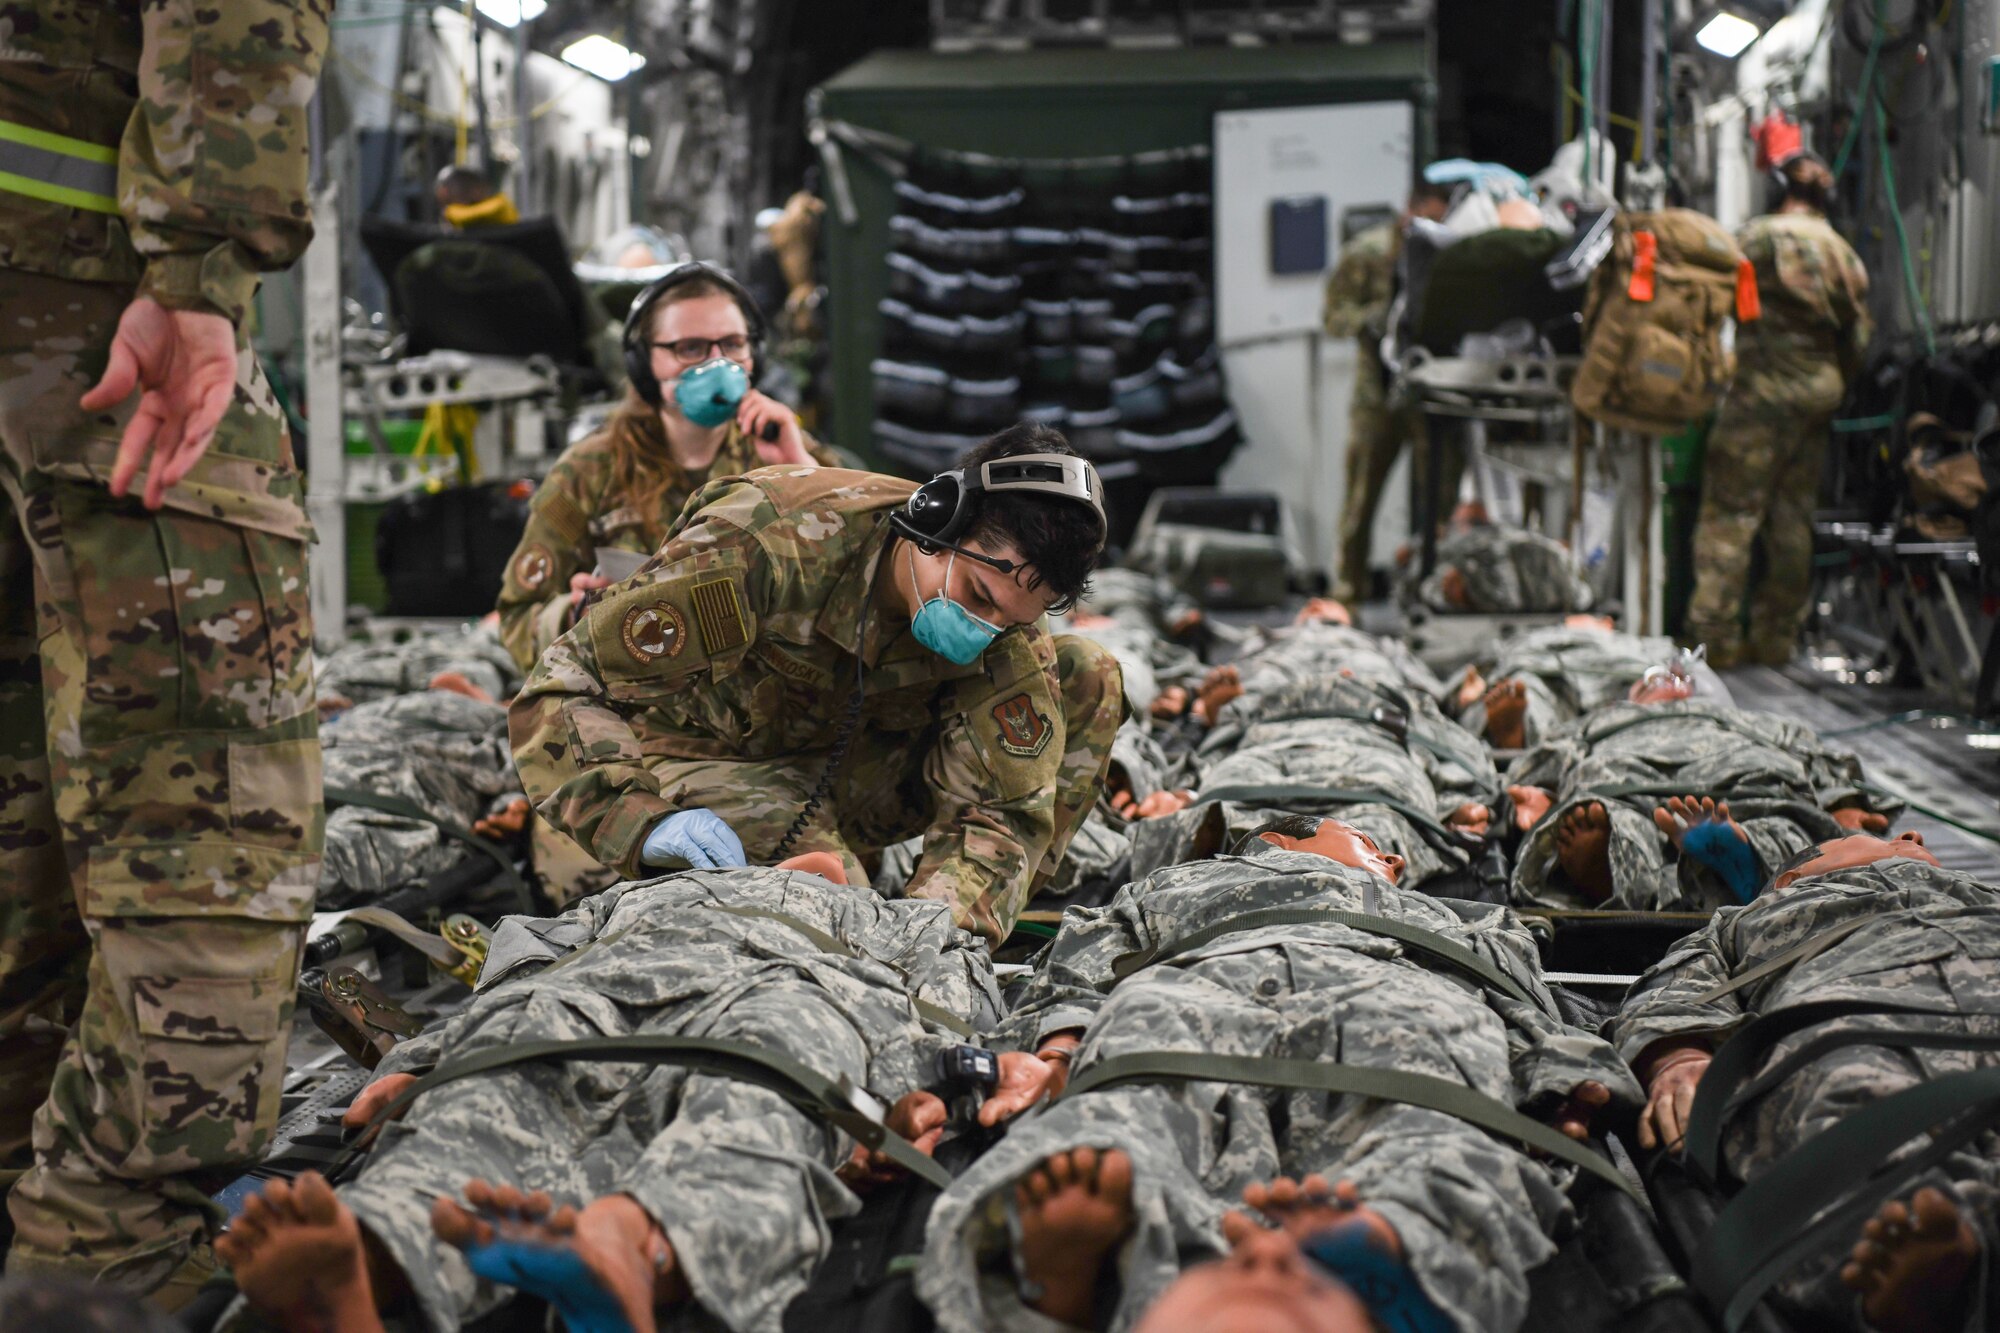 Senior Airman Dominic Slonosky, 445th Aeromedical Evacuation Squadron, checks the vitals of patients on a 445th Airlift Wing C-17 Globemaster III during the Ultimate Caduceus training exercise April 29, 2021. U.S. Transportation Command (USTRANSCOM) began a week-long aeromedical and global patient movement exercise, Ultimate Caduceus, April 26. Approximately 250 personnel including members of the 445th Airlift Wing and the 88th Air Base Wing participated in the field training exercise. (U.S. Air Force photo//Master Sgt. Patrick O’Reilly)